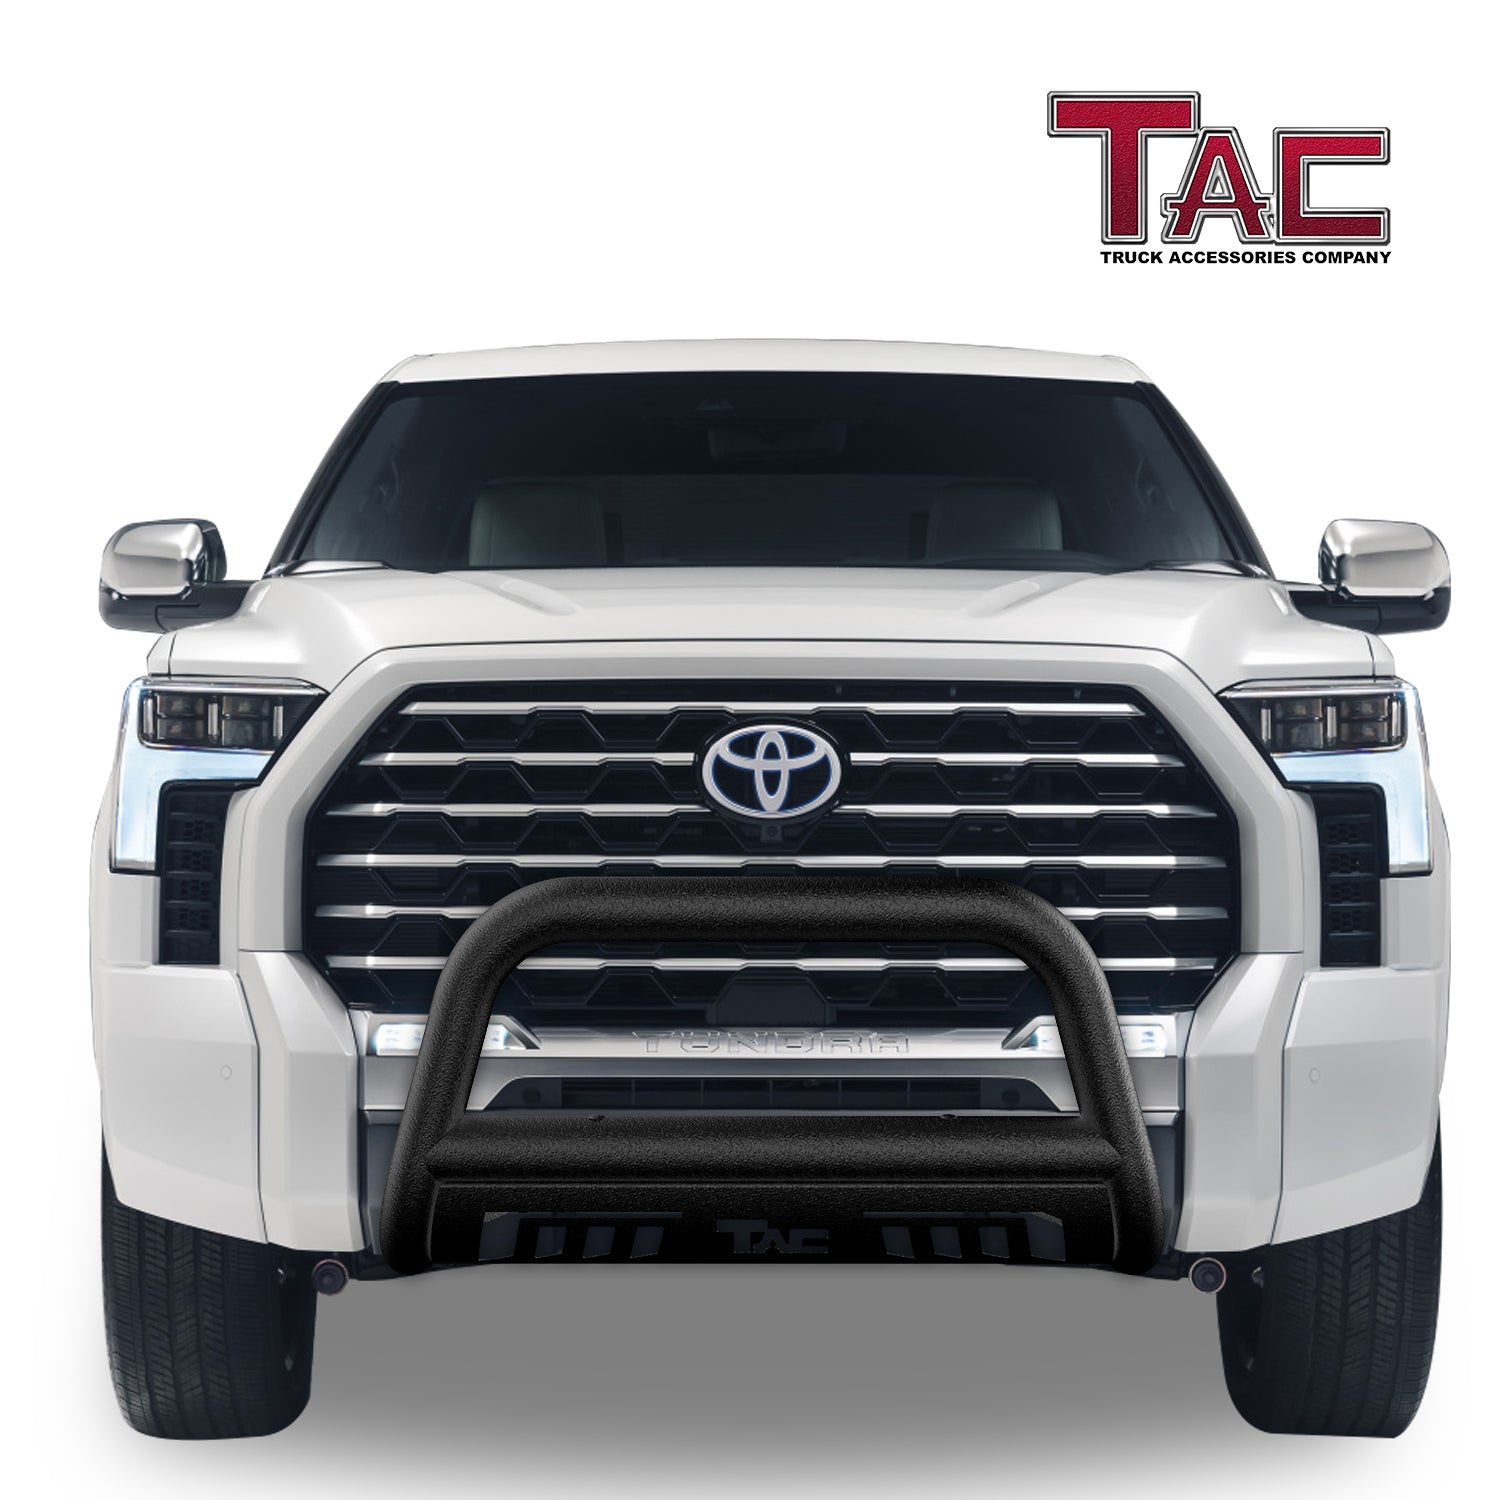 TAC Bull Bar Compatible with 2022-2024 Toyota Tundra Pickup Truck 3” Black Front Bumper Grille Guard Brush Guard Off Road Accessories - 0